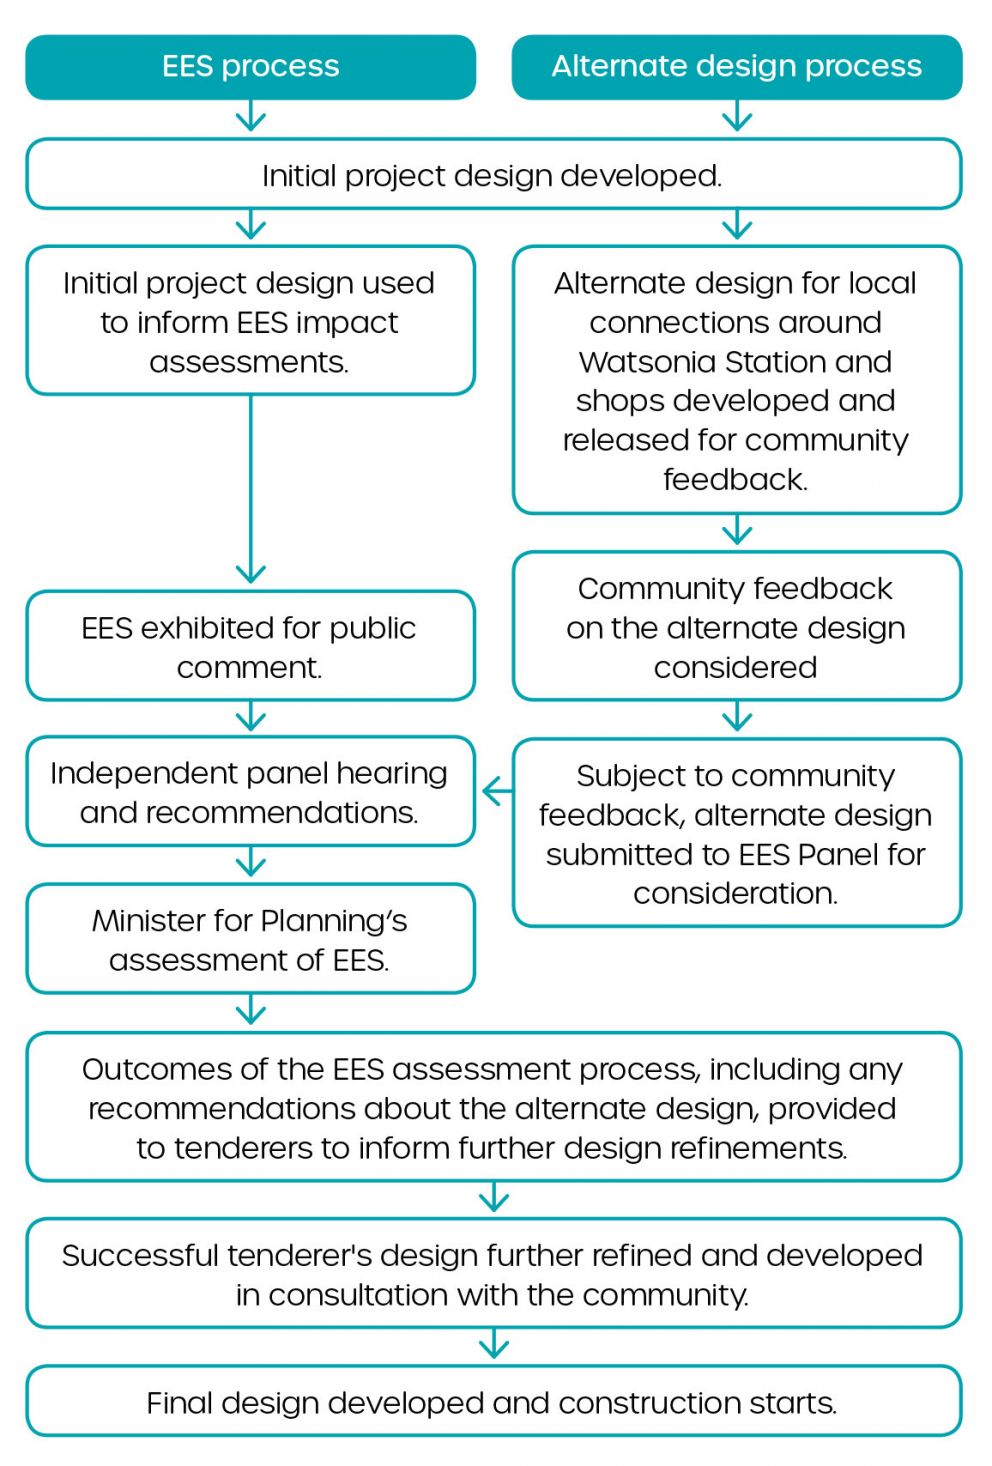 A flowchart showing how the Environmental Effects Statement approval process and the Watsonia alternate design process relate. The process begins with the initial project design developed, the designs are then released to the community for comment, feedback is then incorporated and submitted to the Minister for Planning, recommendations to inform design refinements are included, design further refined in consultation with the community and final design developed and construction begins.